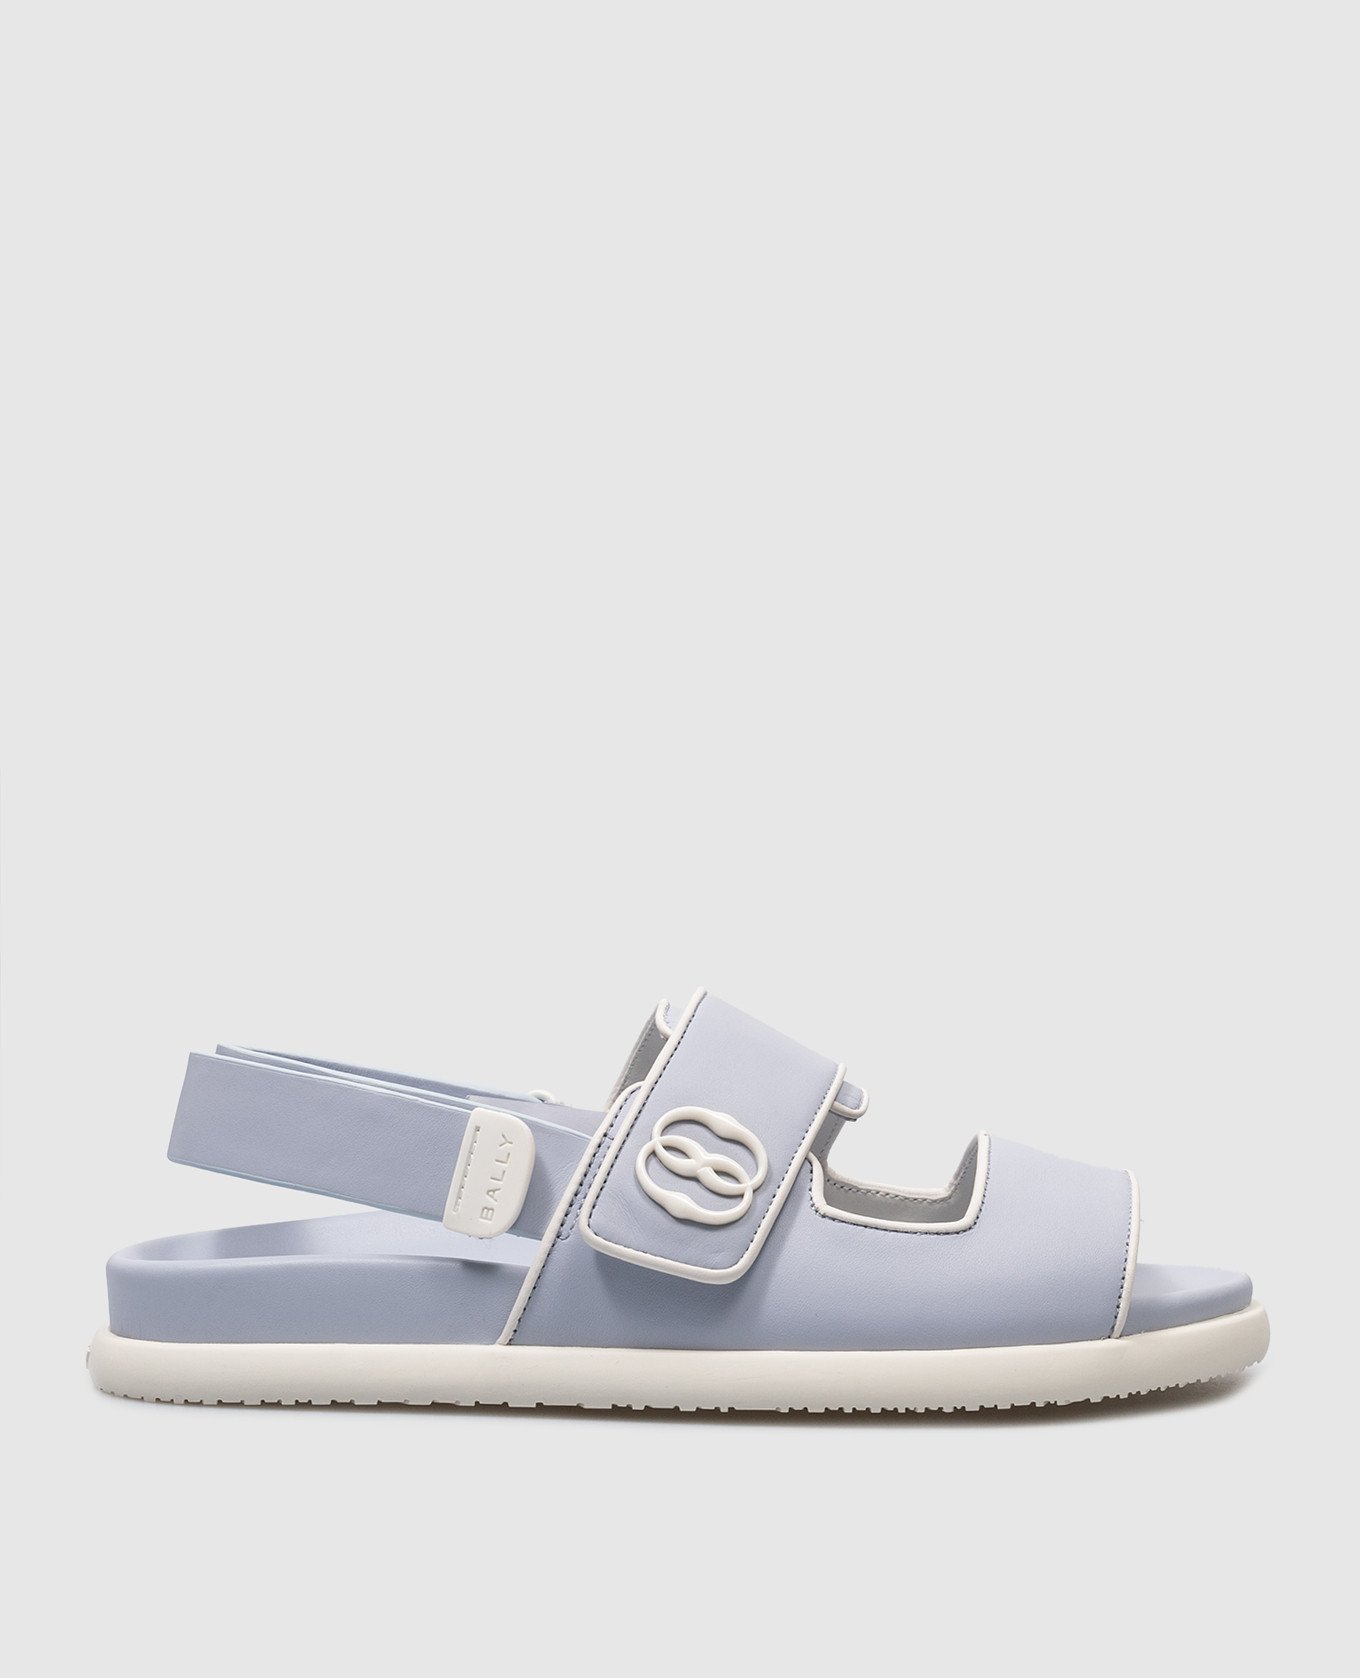 Nyla logo sandals in blue leather